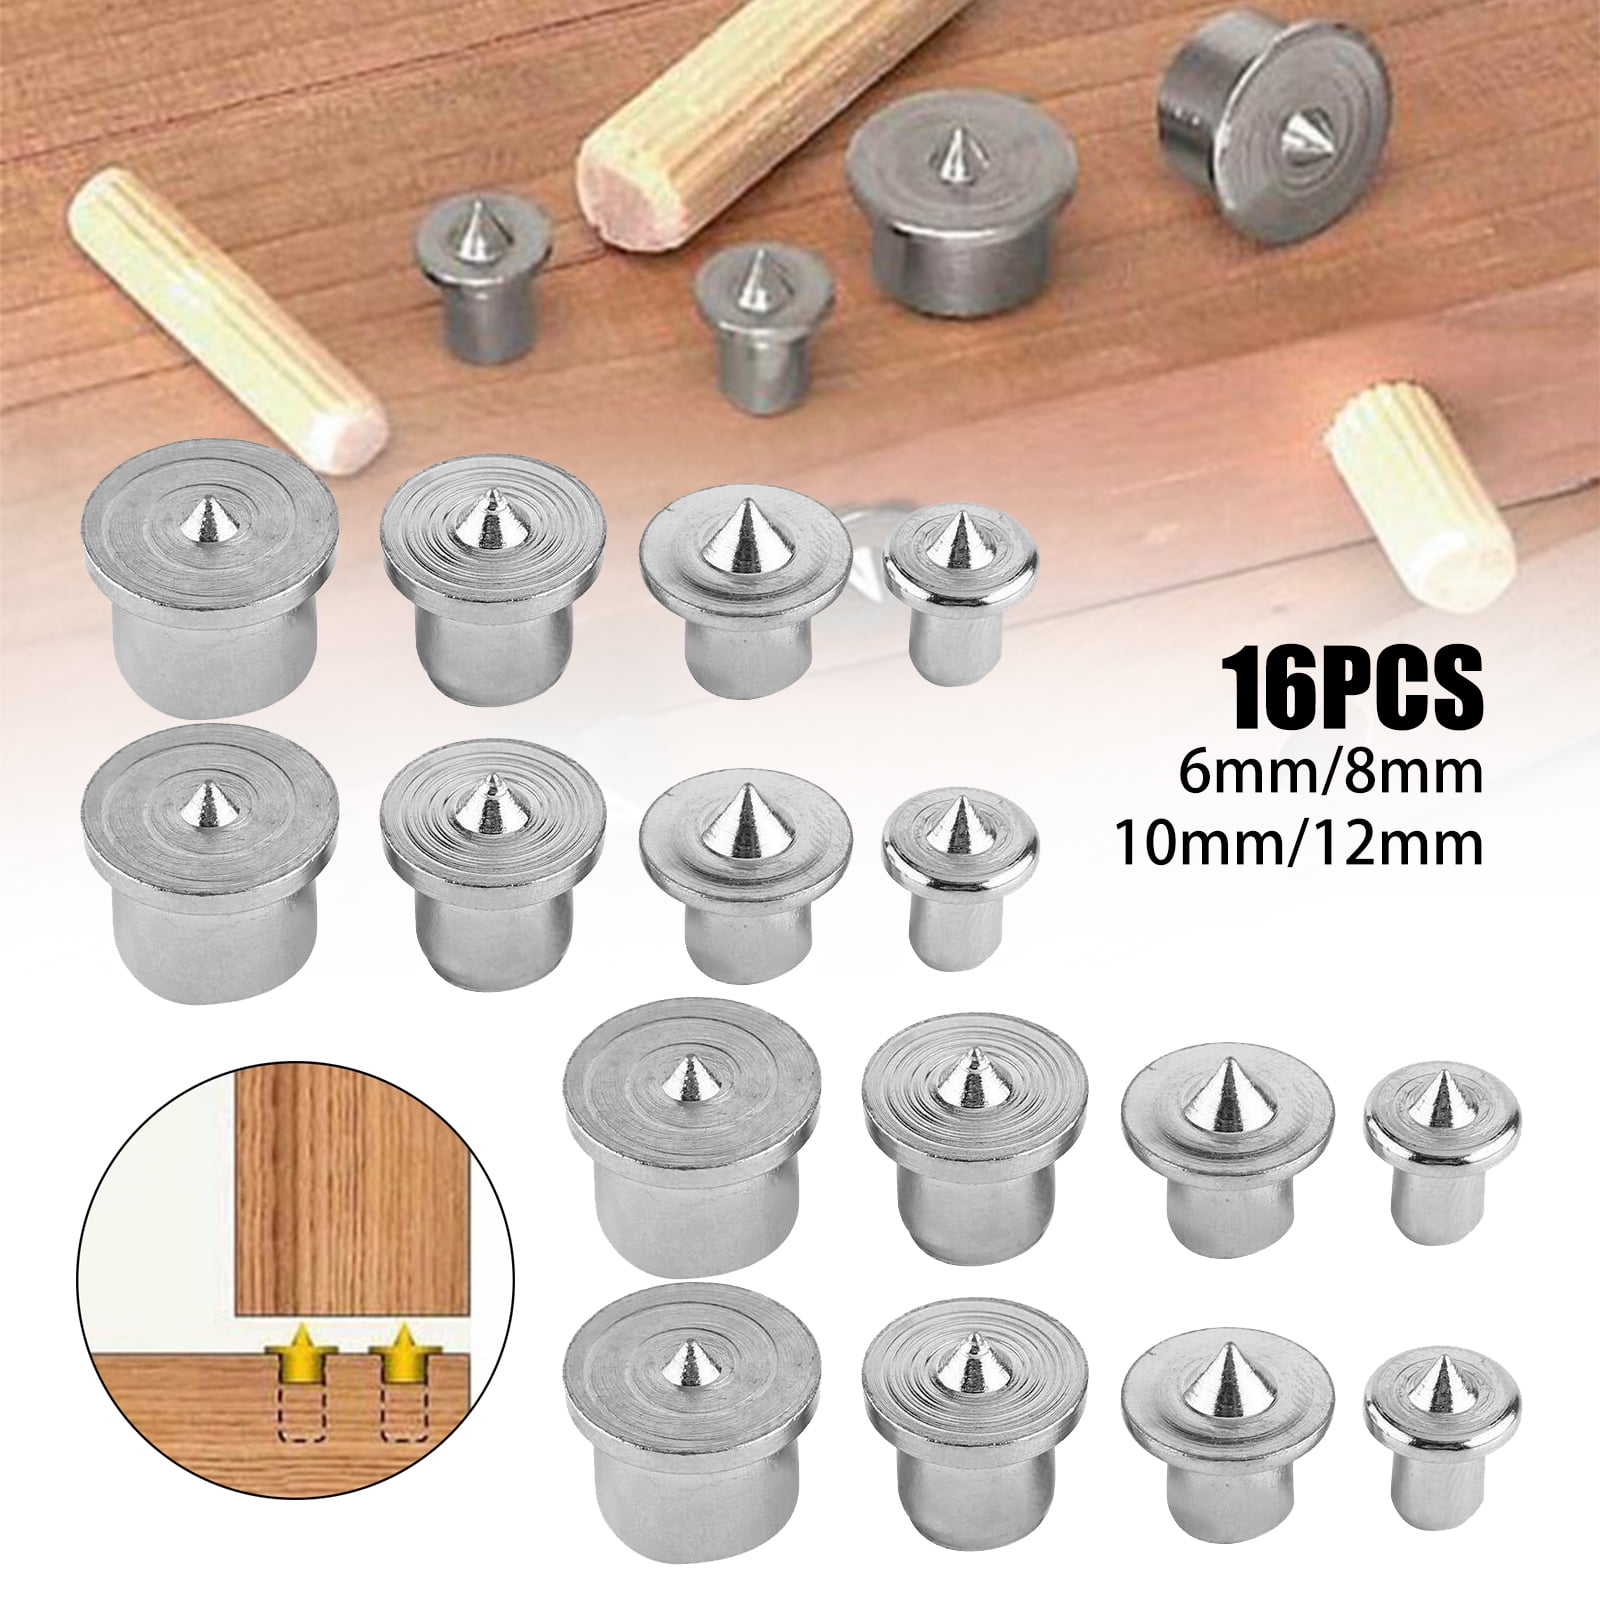 Dowel Pins Tenon Center Point Hole Marker Locator Drill Bits Woodworking Tools 